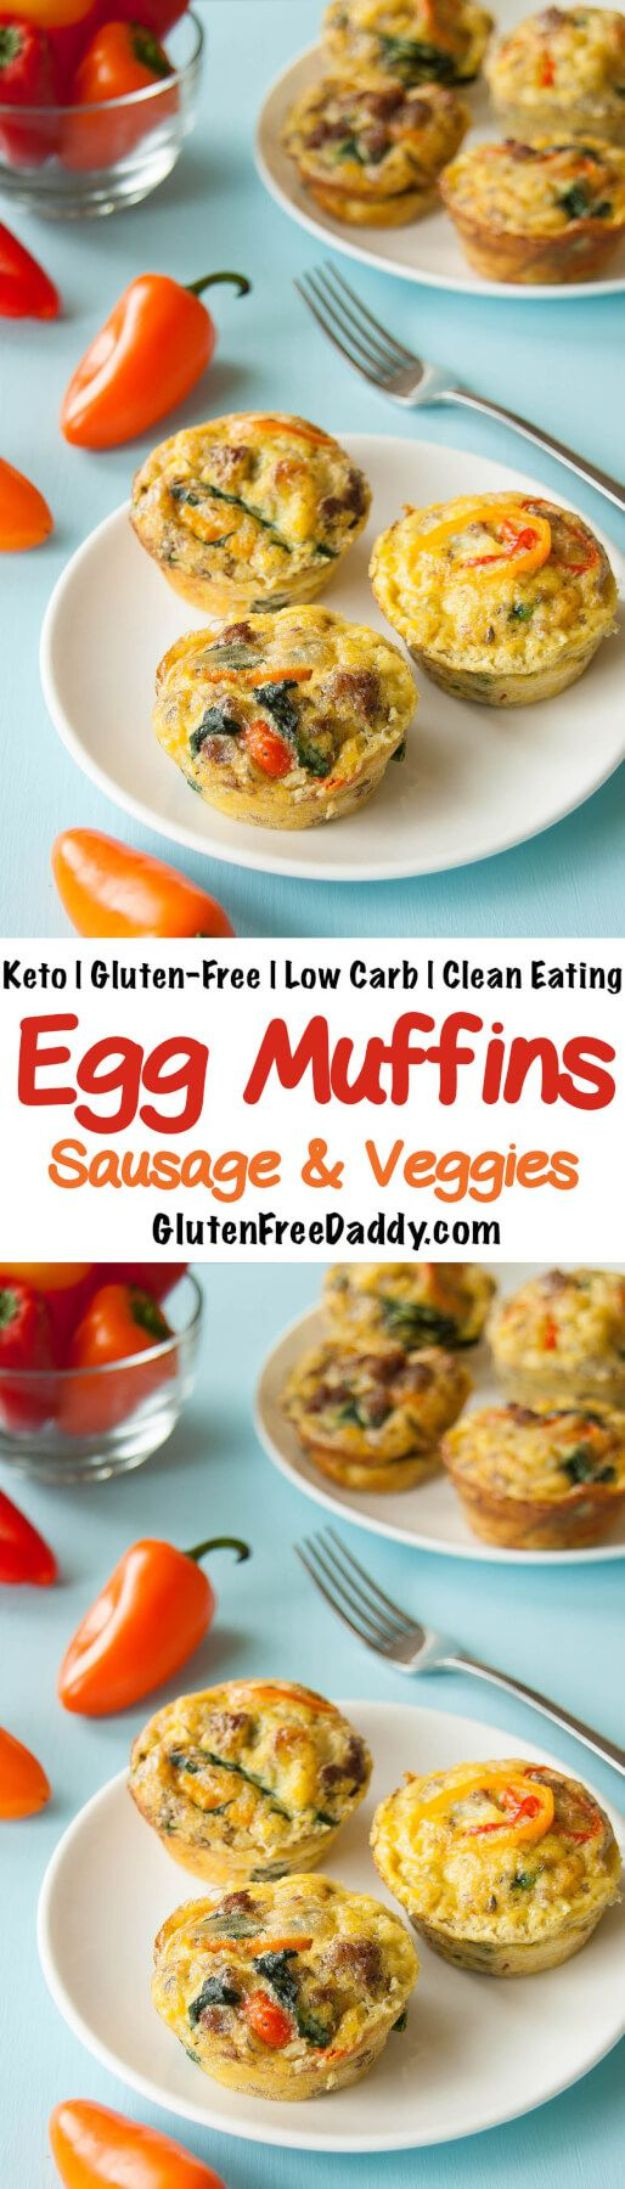 Keto Breakfast Muffins Eggs Sausage
 38 Keto Breakfasts To Start Your Morning f Right